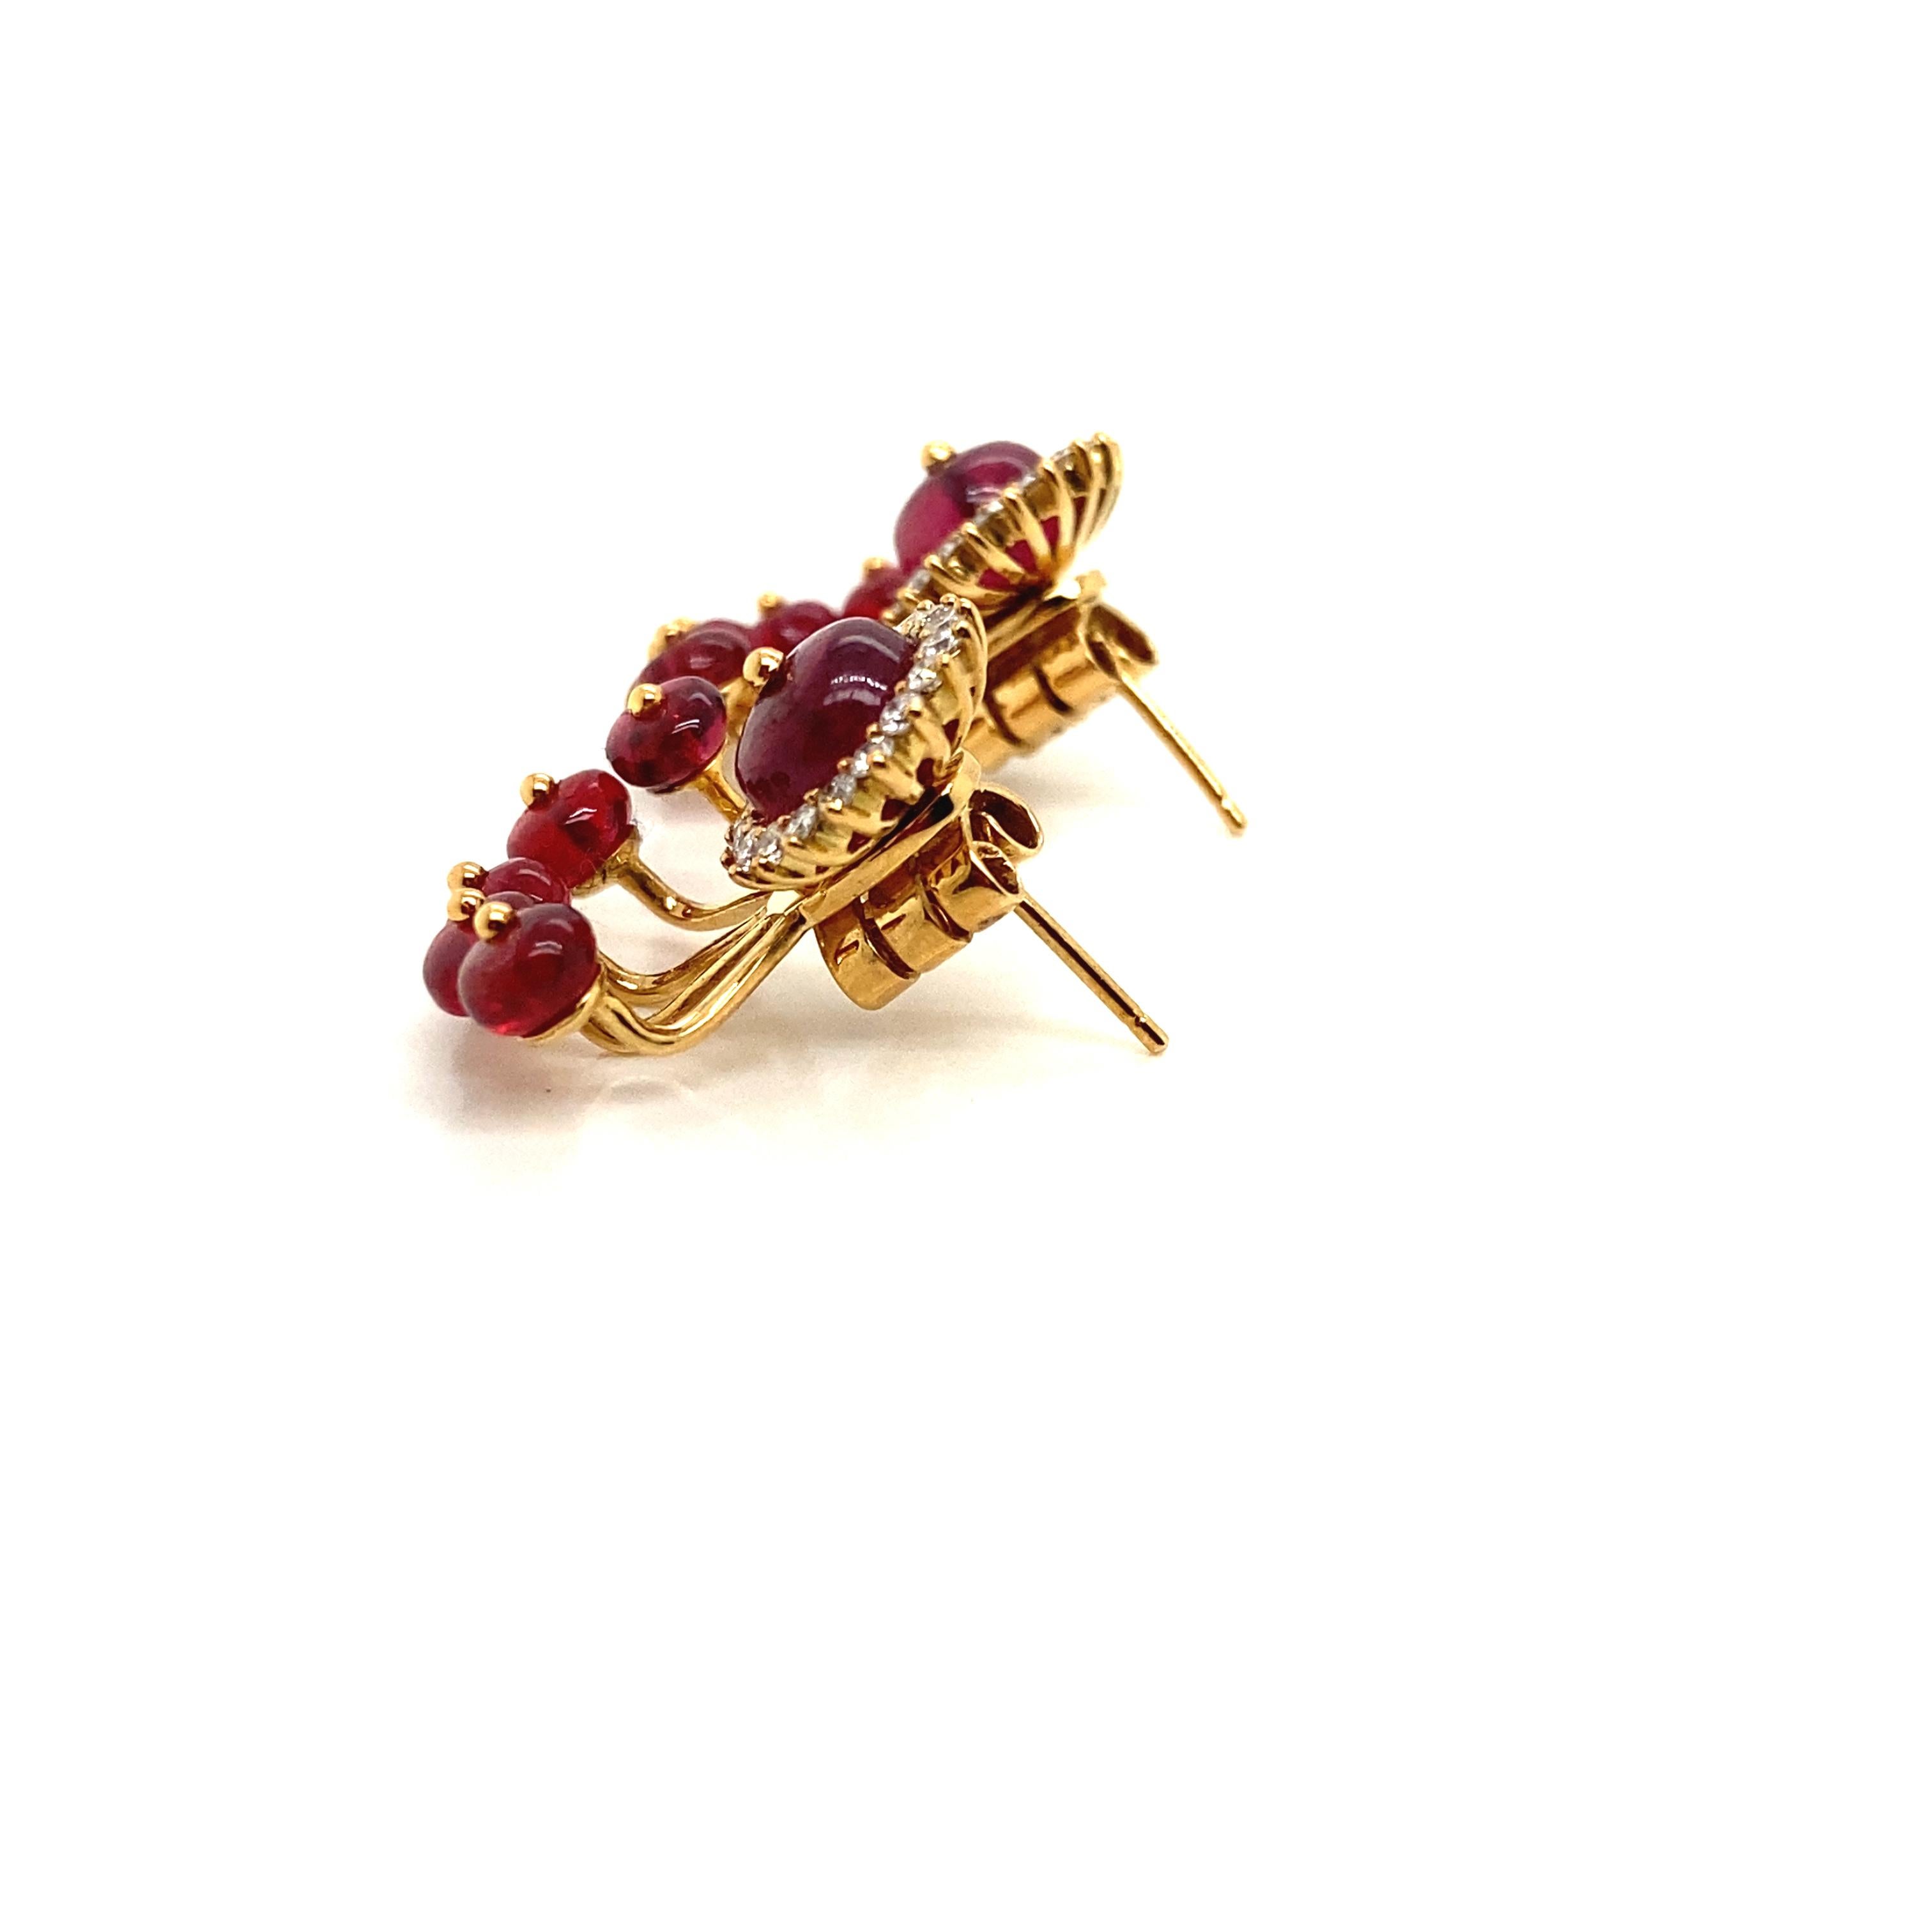 12.98 Carat Natural Red Spinel Beads and Diamond Gold Earrings For Sale 4